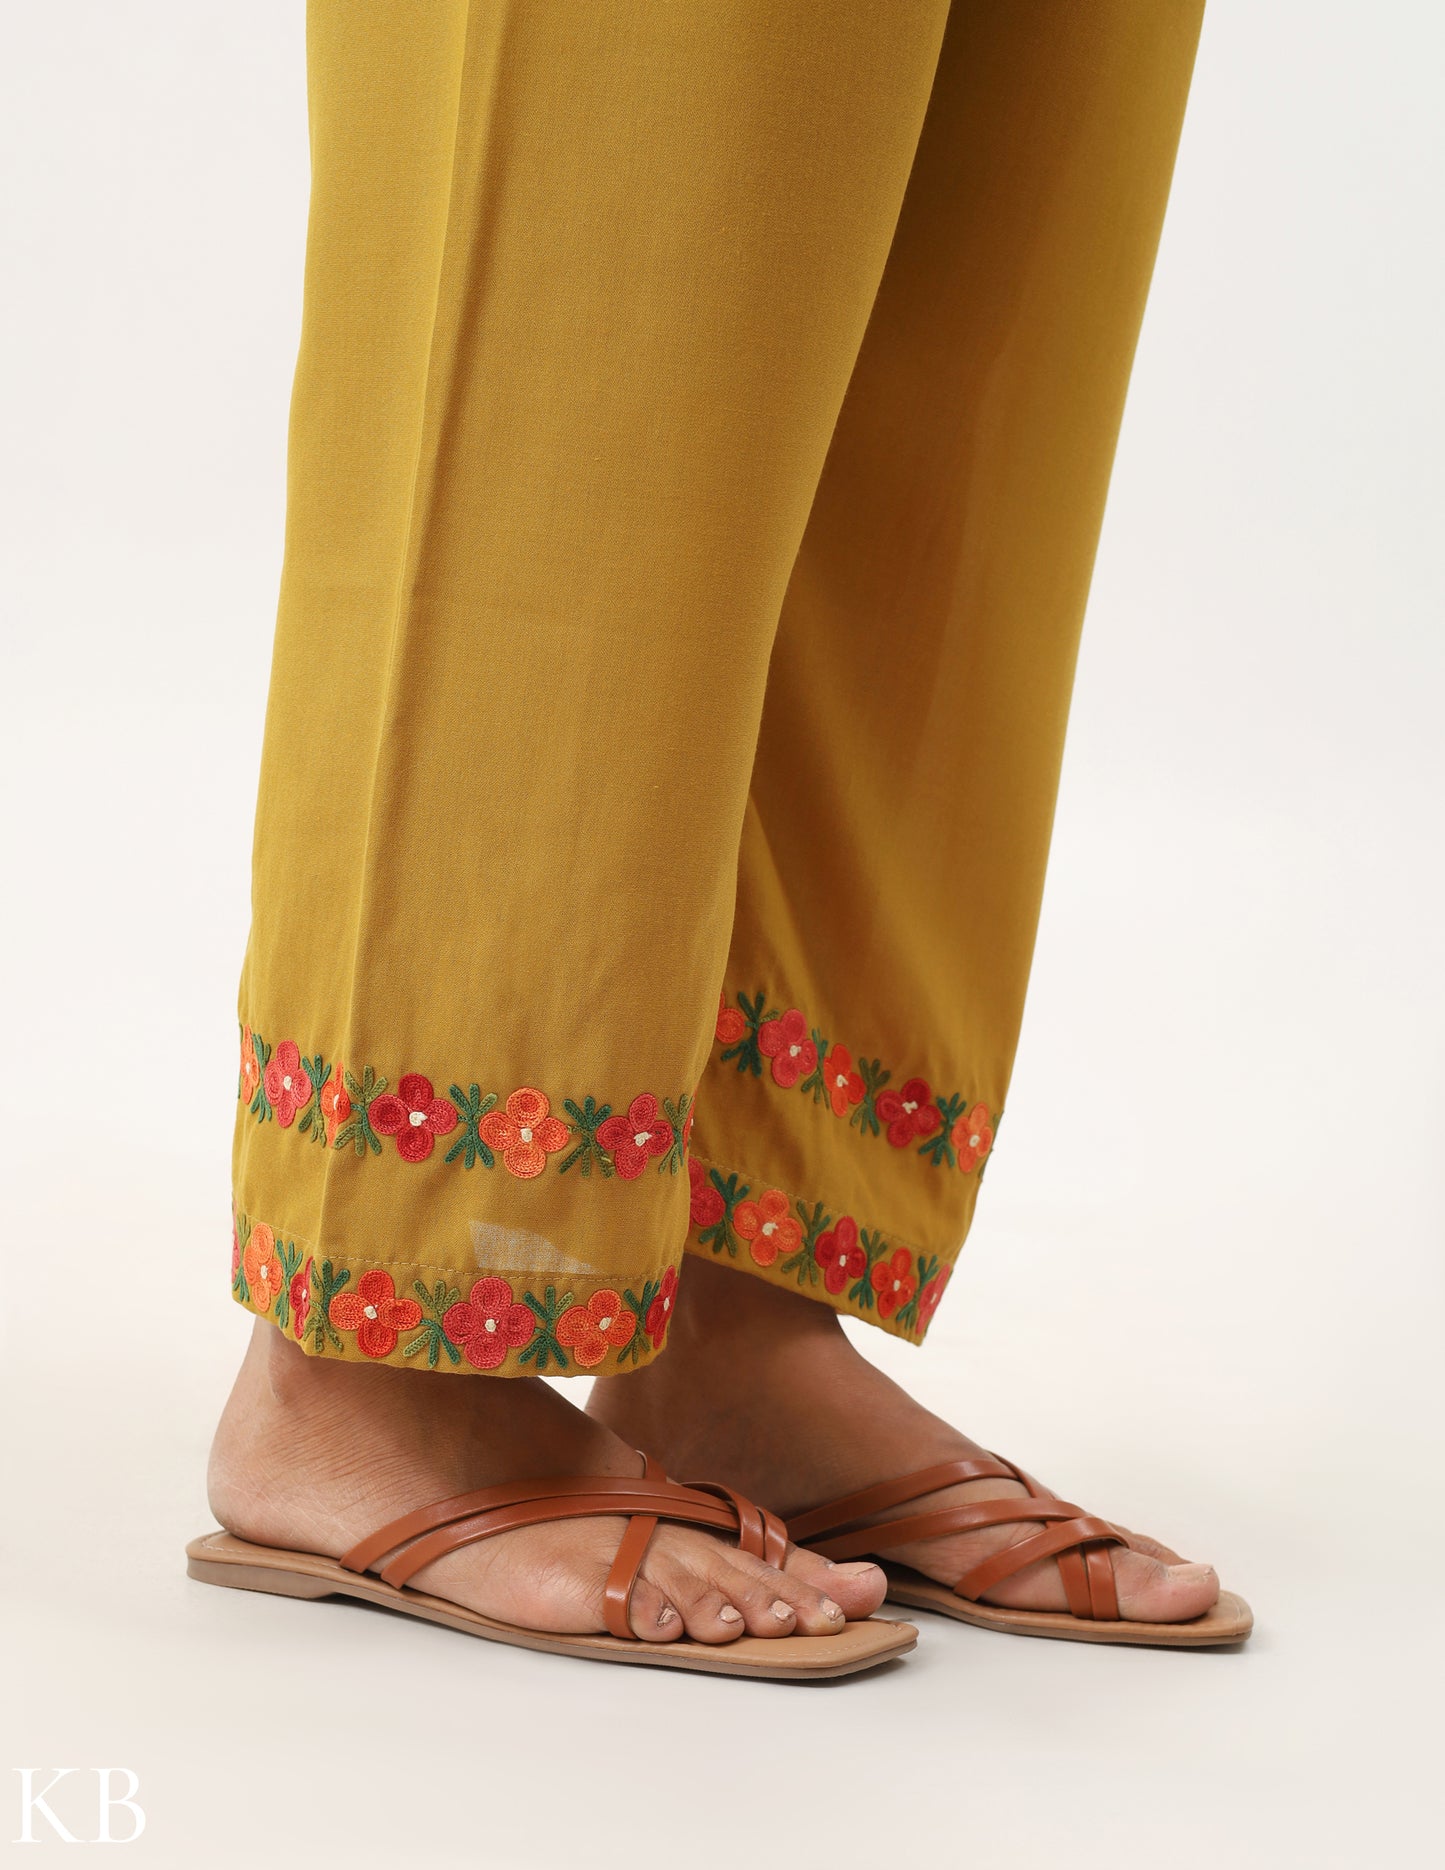 Mustard Yellow Cotton Embroidered Co-ord Set - Kashmir Box